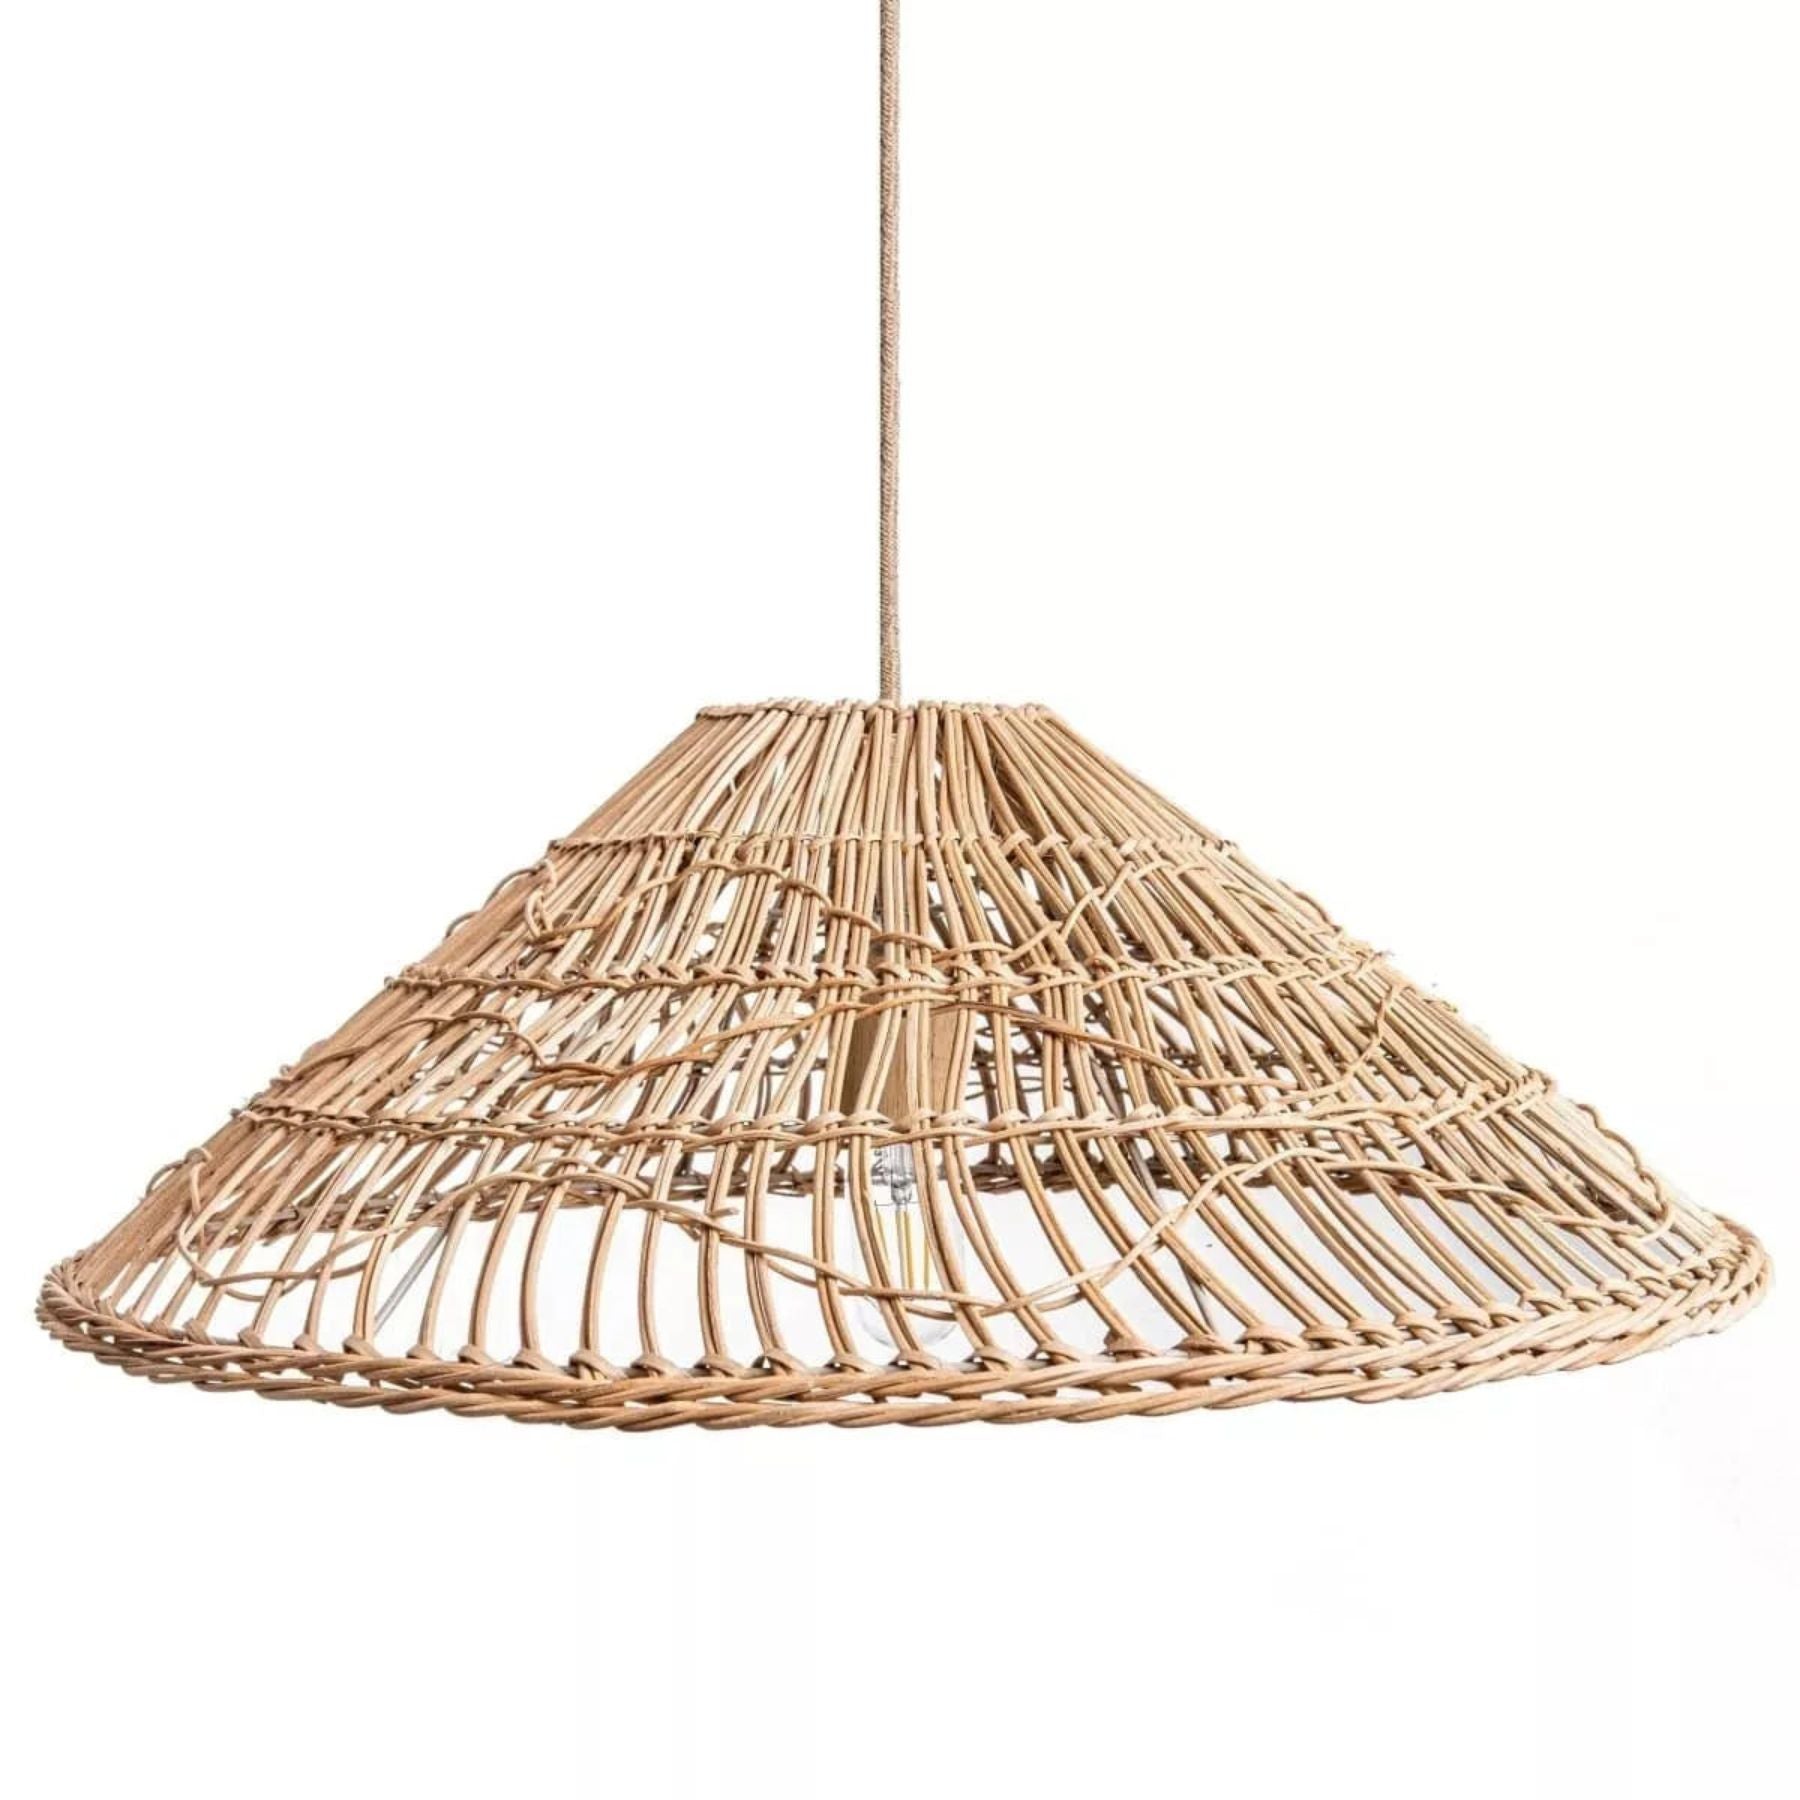 yara rattan hanging lamp is a combination of tradition and innovation in design that conveys a classic feel